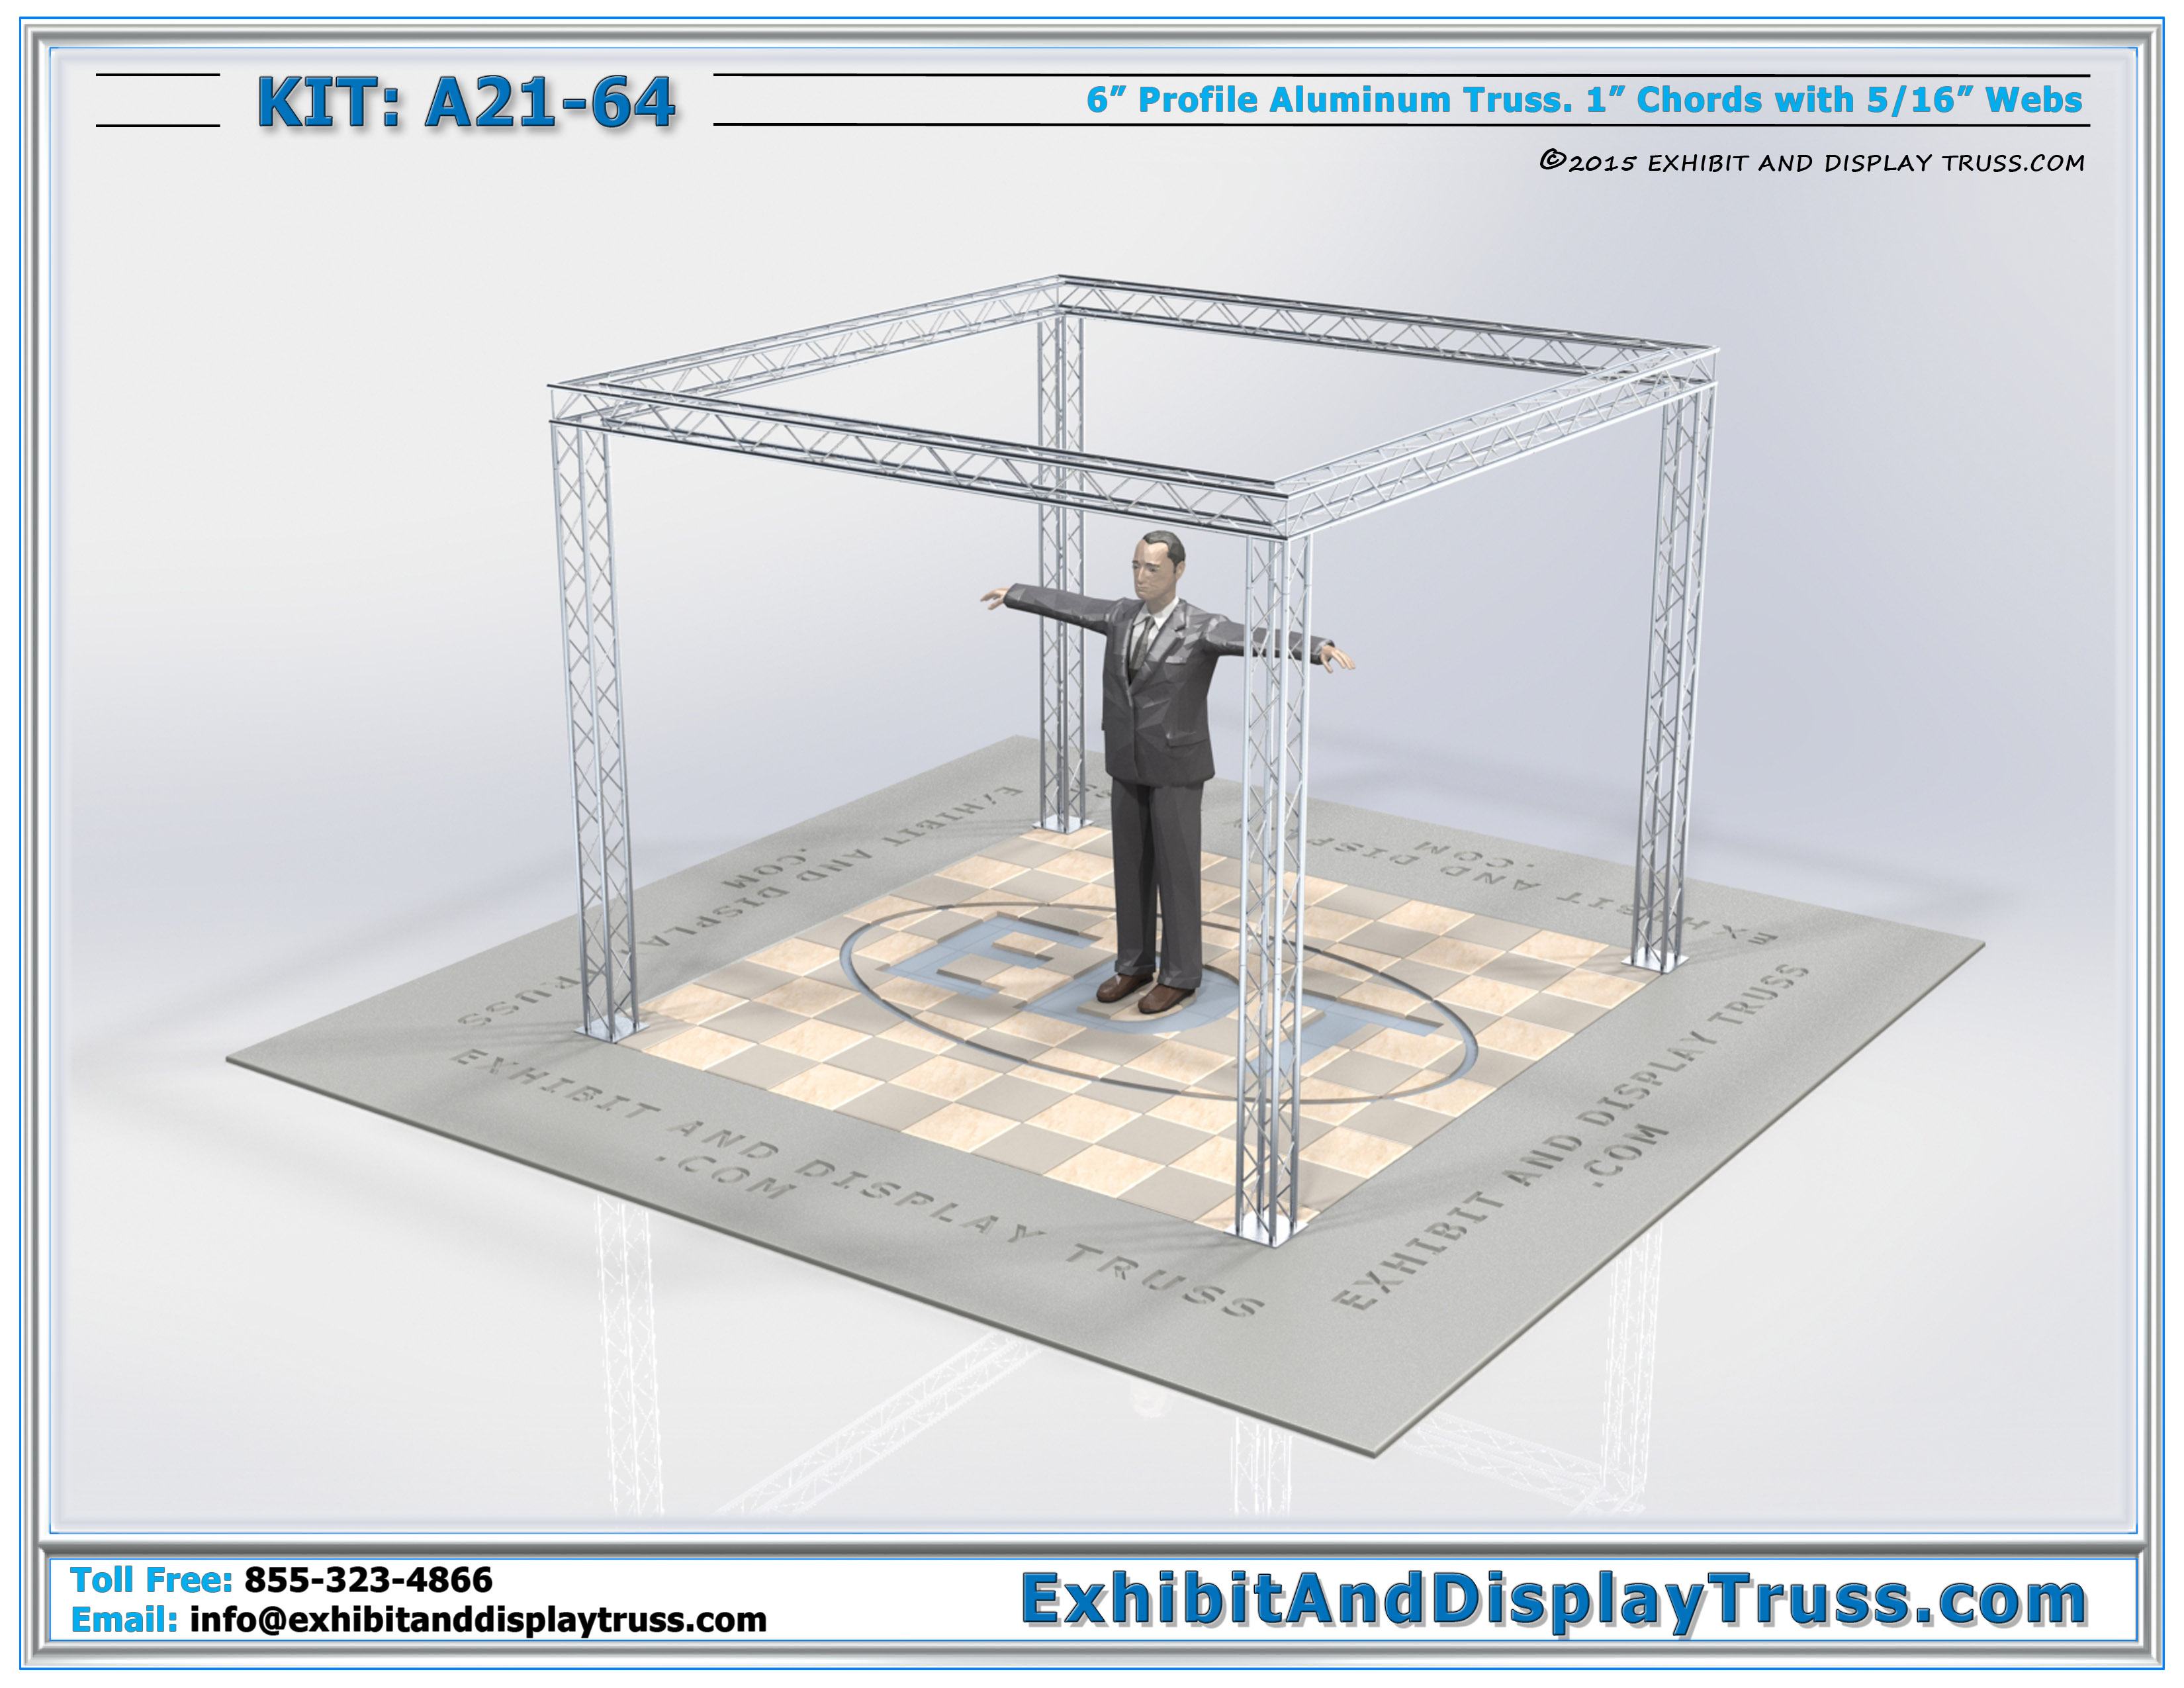 10’ x 10’ | Exhibition Exhibit and Display Booth Kits